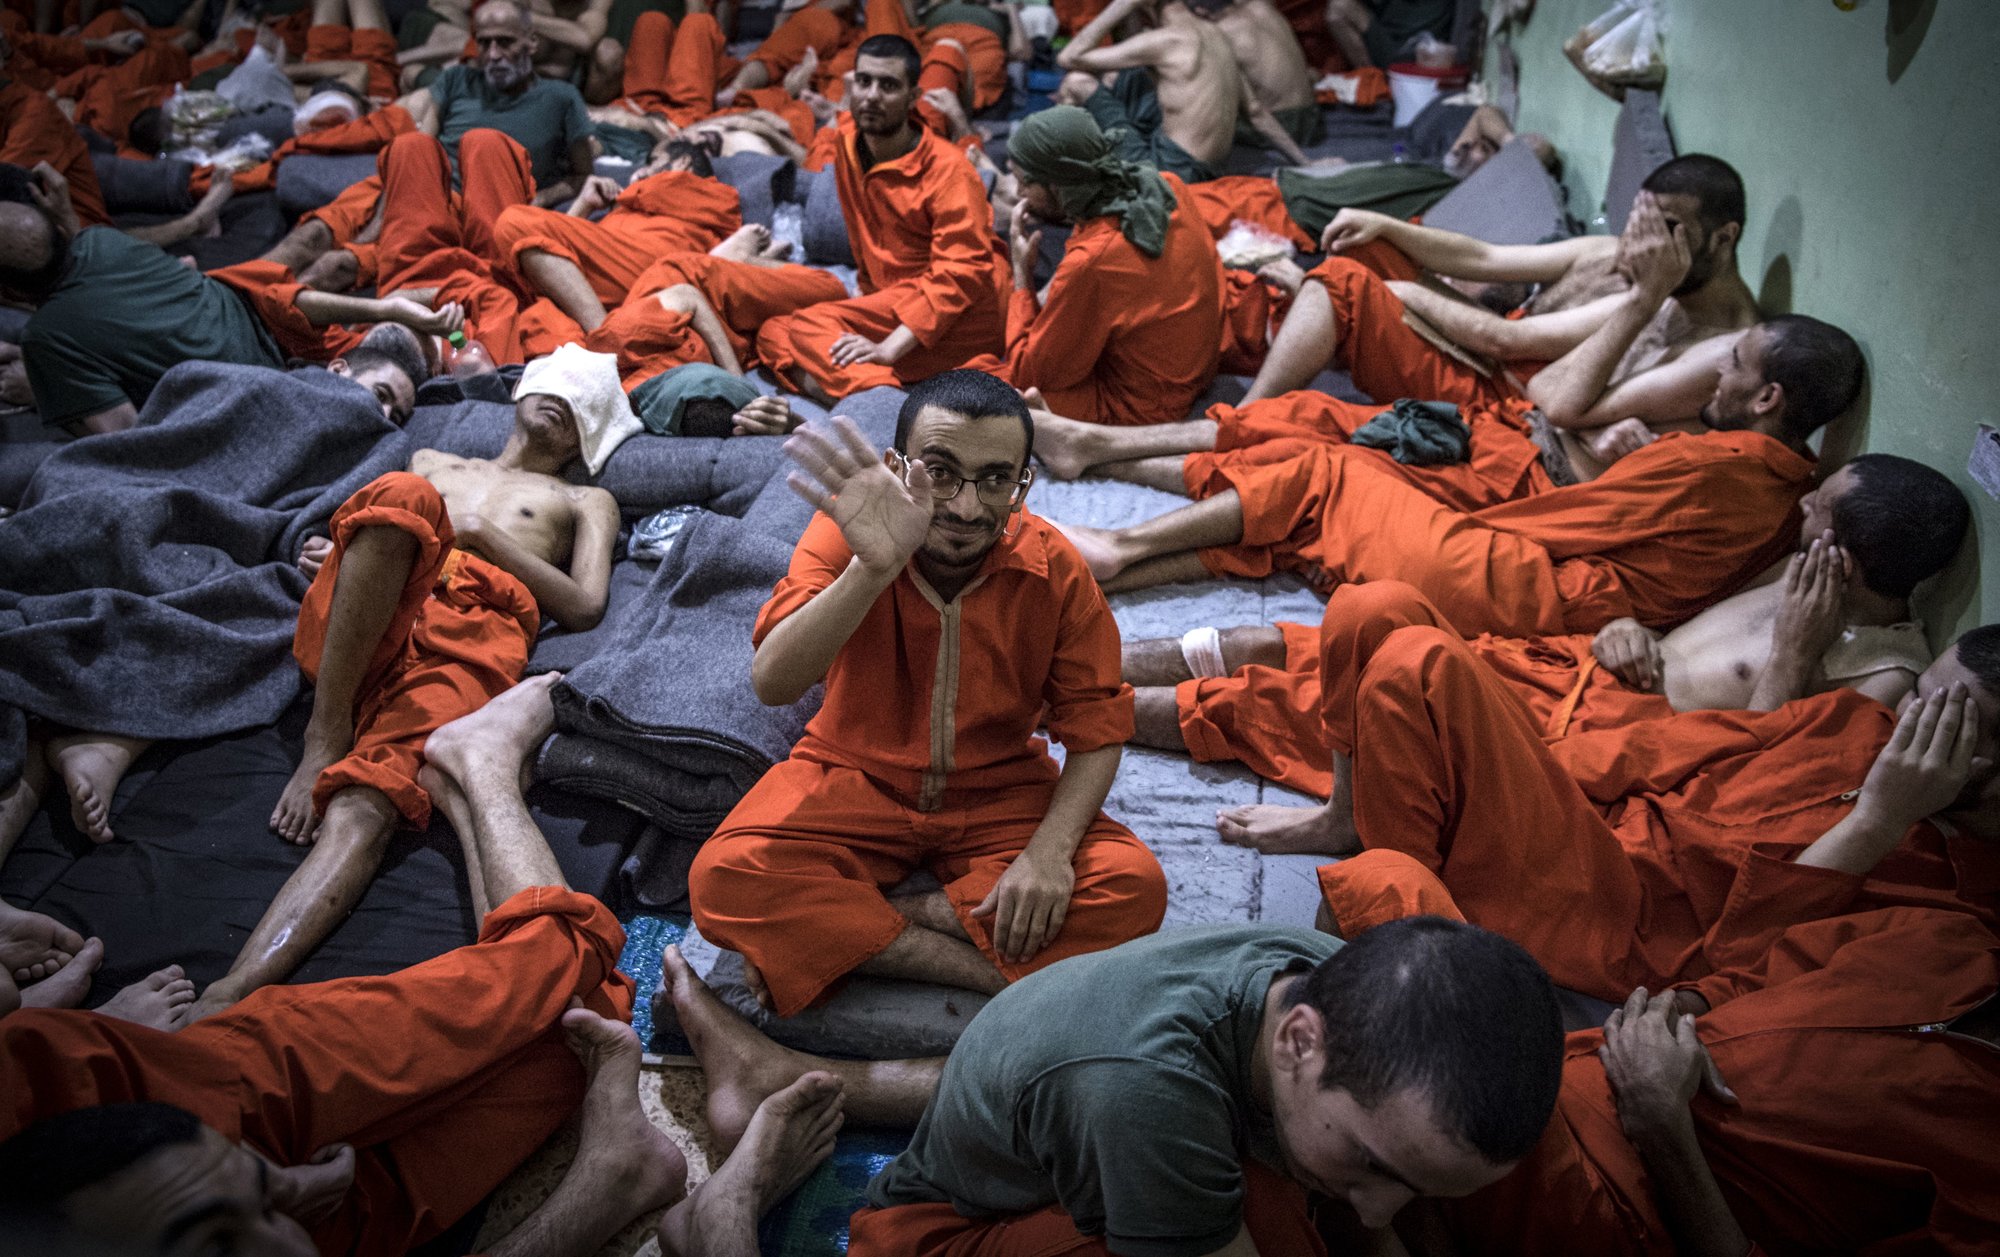 Men, suspected of being affiliated with the Islamic State group, gather in a prison cell in the northeastern Syrian city of Hasakeh on Oct. 26, 2019. On Nov. 30, 2022, a Connecticut man, Ahmad Khalil Elshazly, 25, pleaded guilty to attempting to provide support to Islamic State terrorists in late 2019. Photo by Fadel Senna/ AFP via Getty Images.